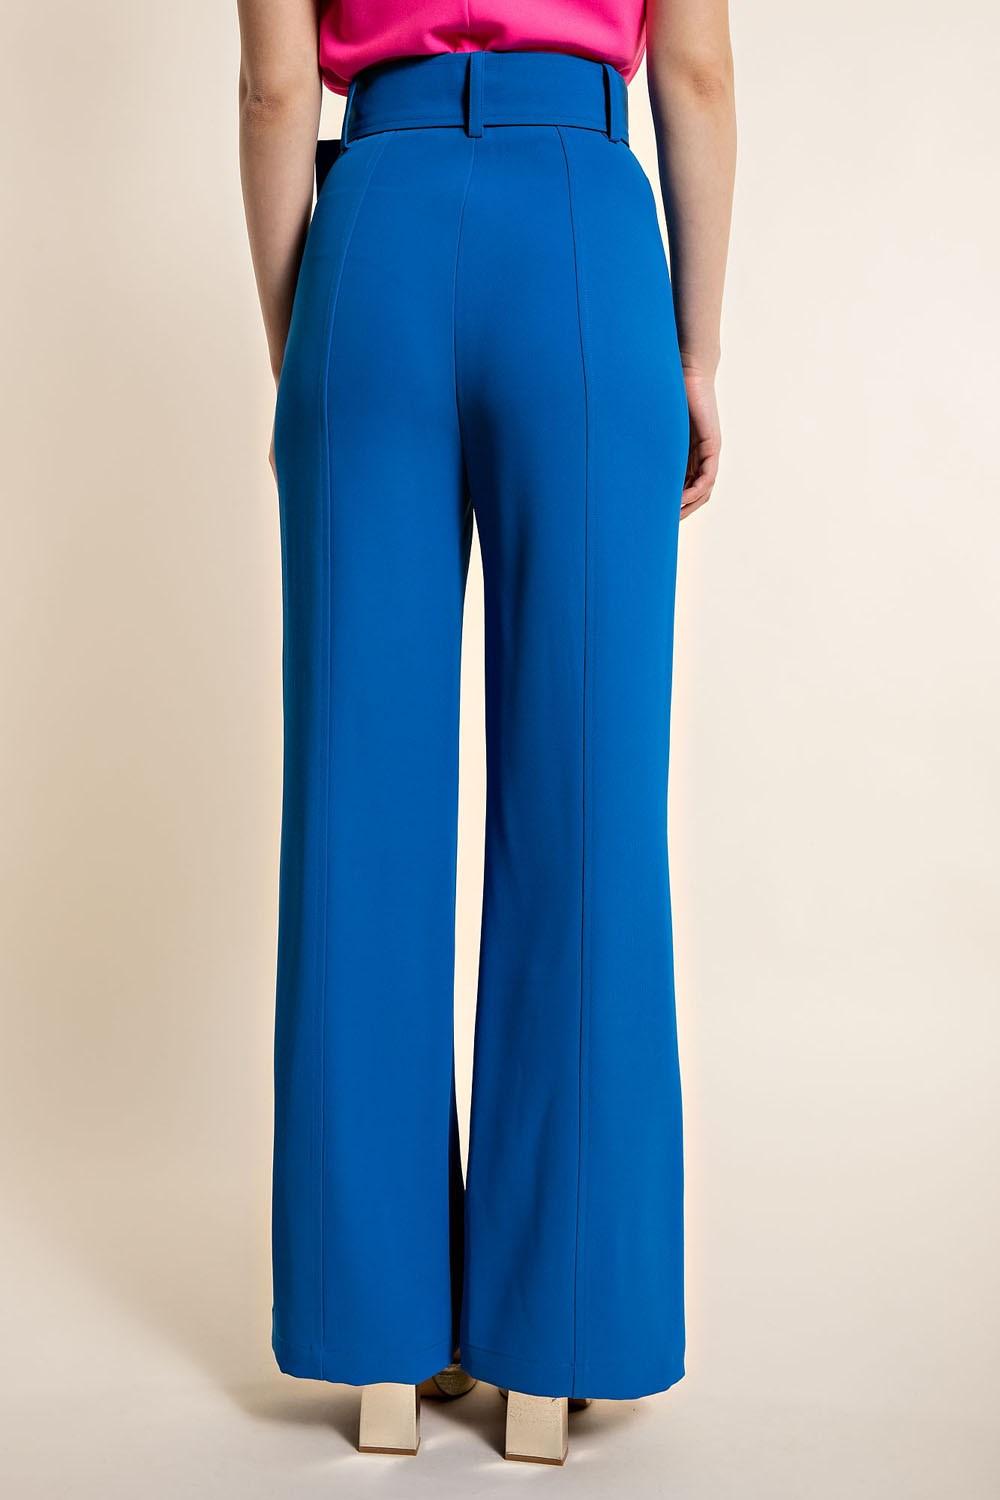 Belted High Waist Wide Leg Pants - RK Collections Boutique